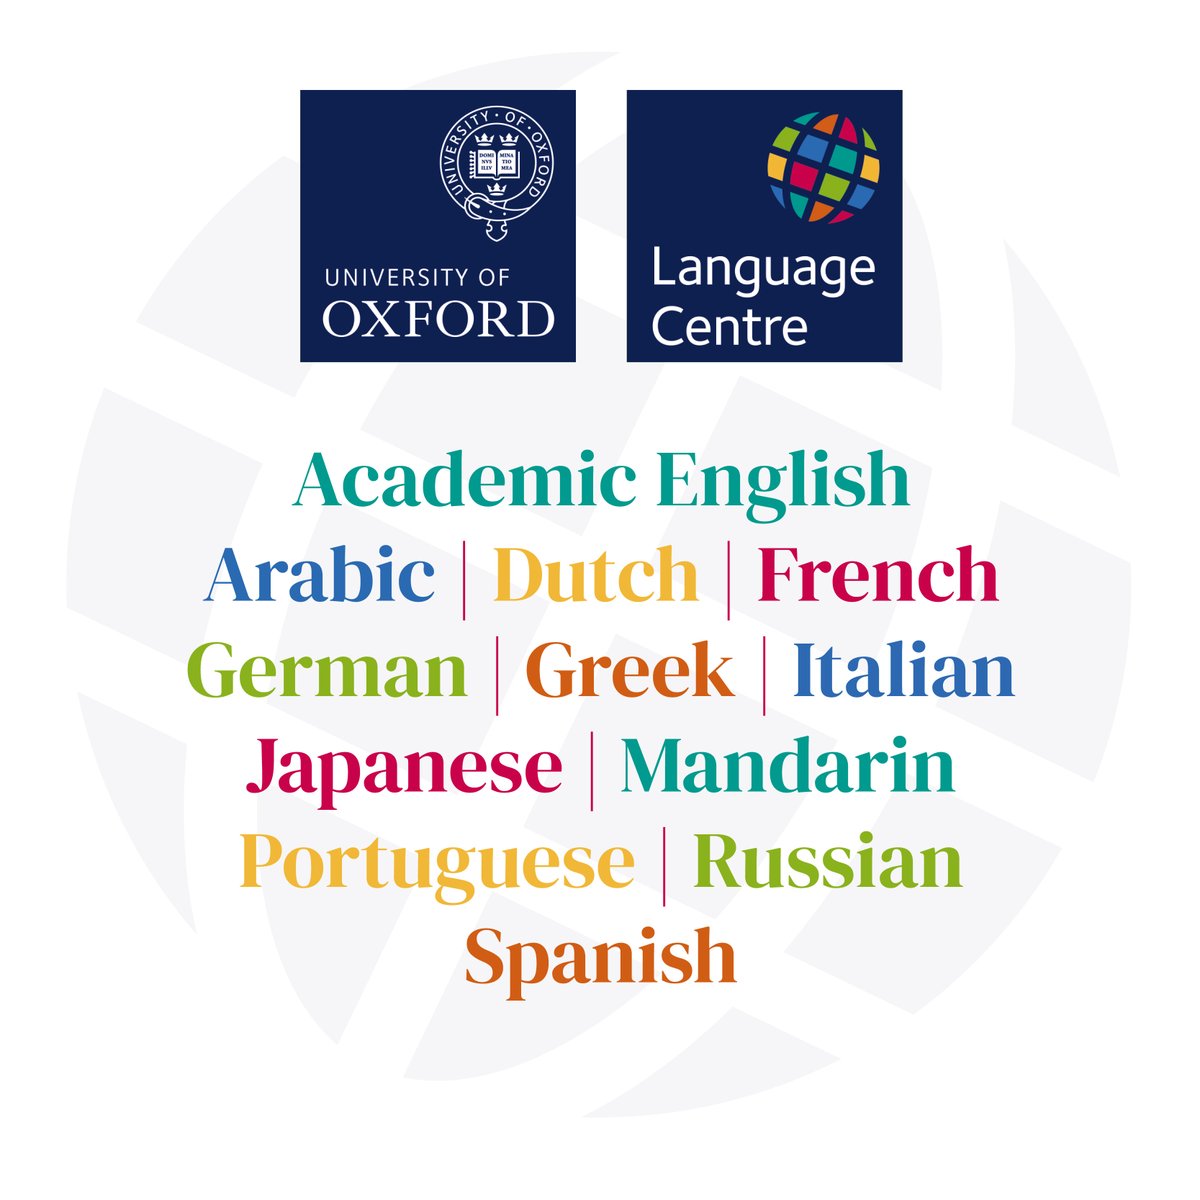 Did you know @OxUniLangCentre Modern Languages classes are open to all? Full funding available for students who need to learn a language for their studies. @OxUniLangCentre also run Academic English courses to support with spoken & written communication: lang.ox.ac.uk